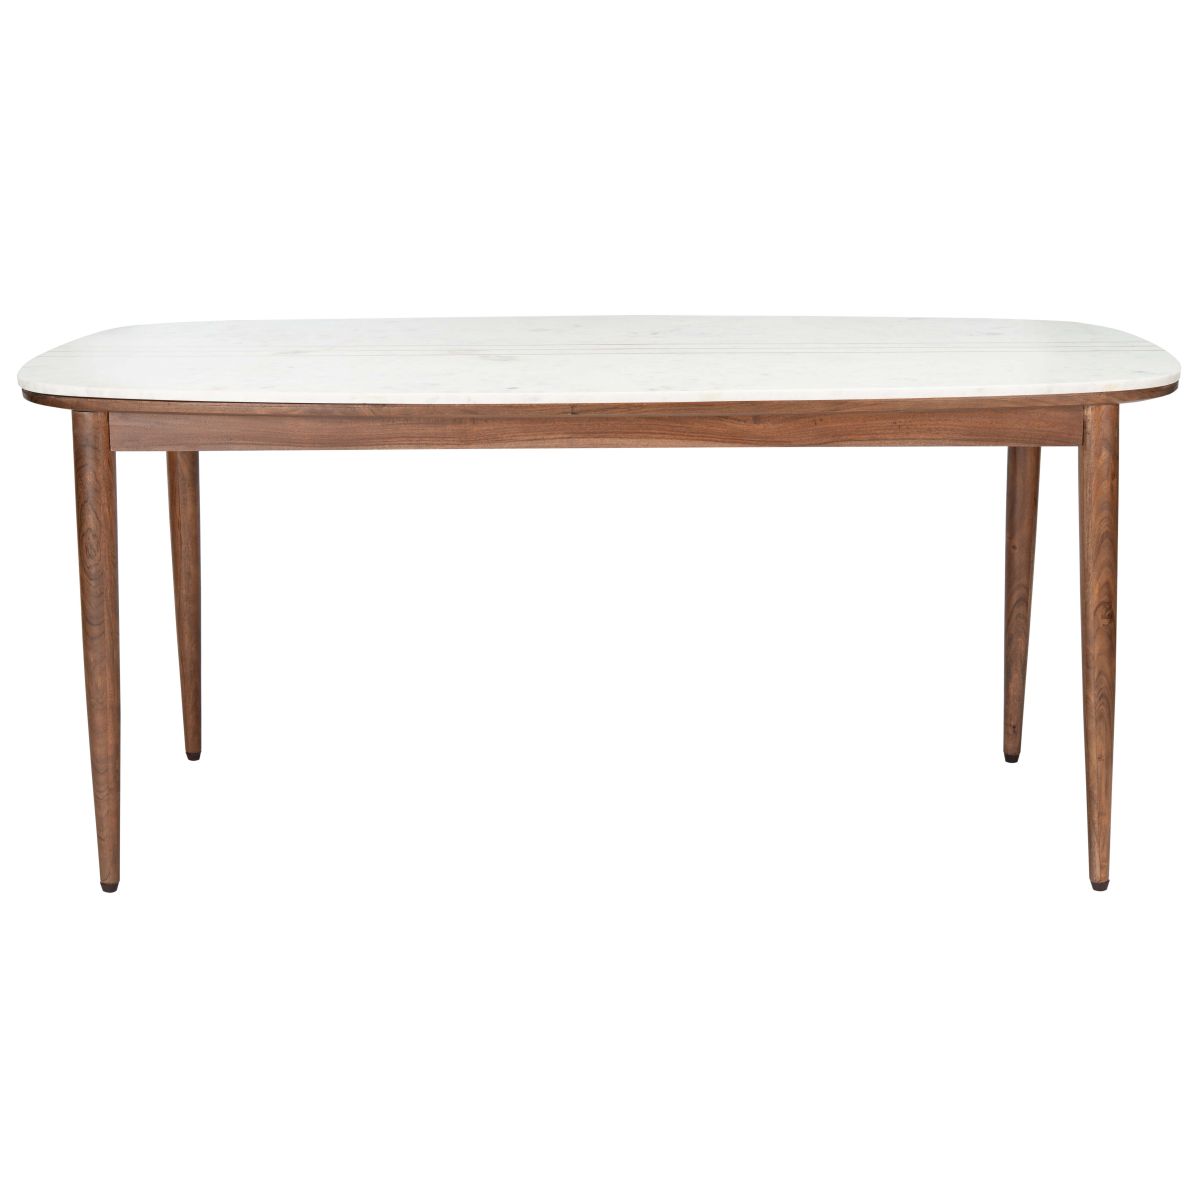 Safavieh Couture Milana Marble Dining Table